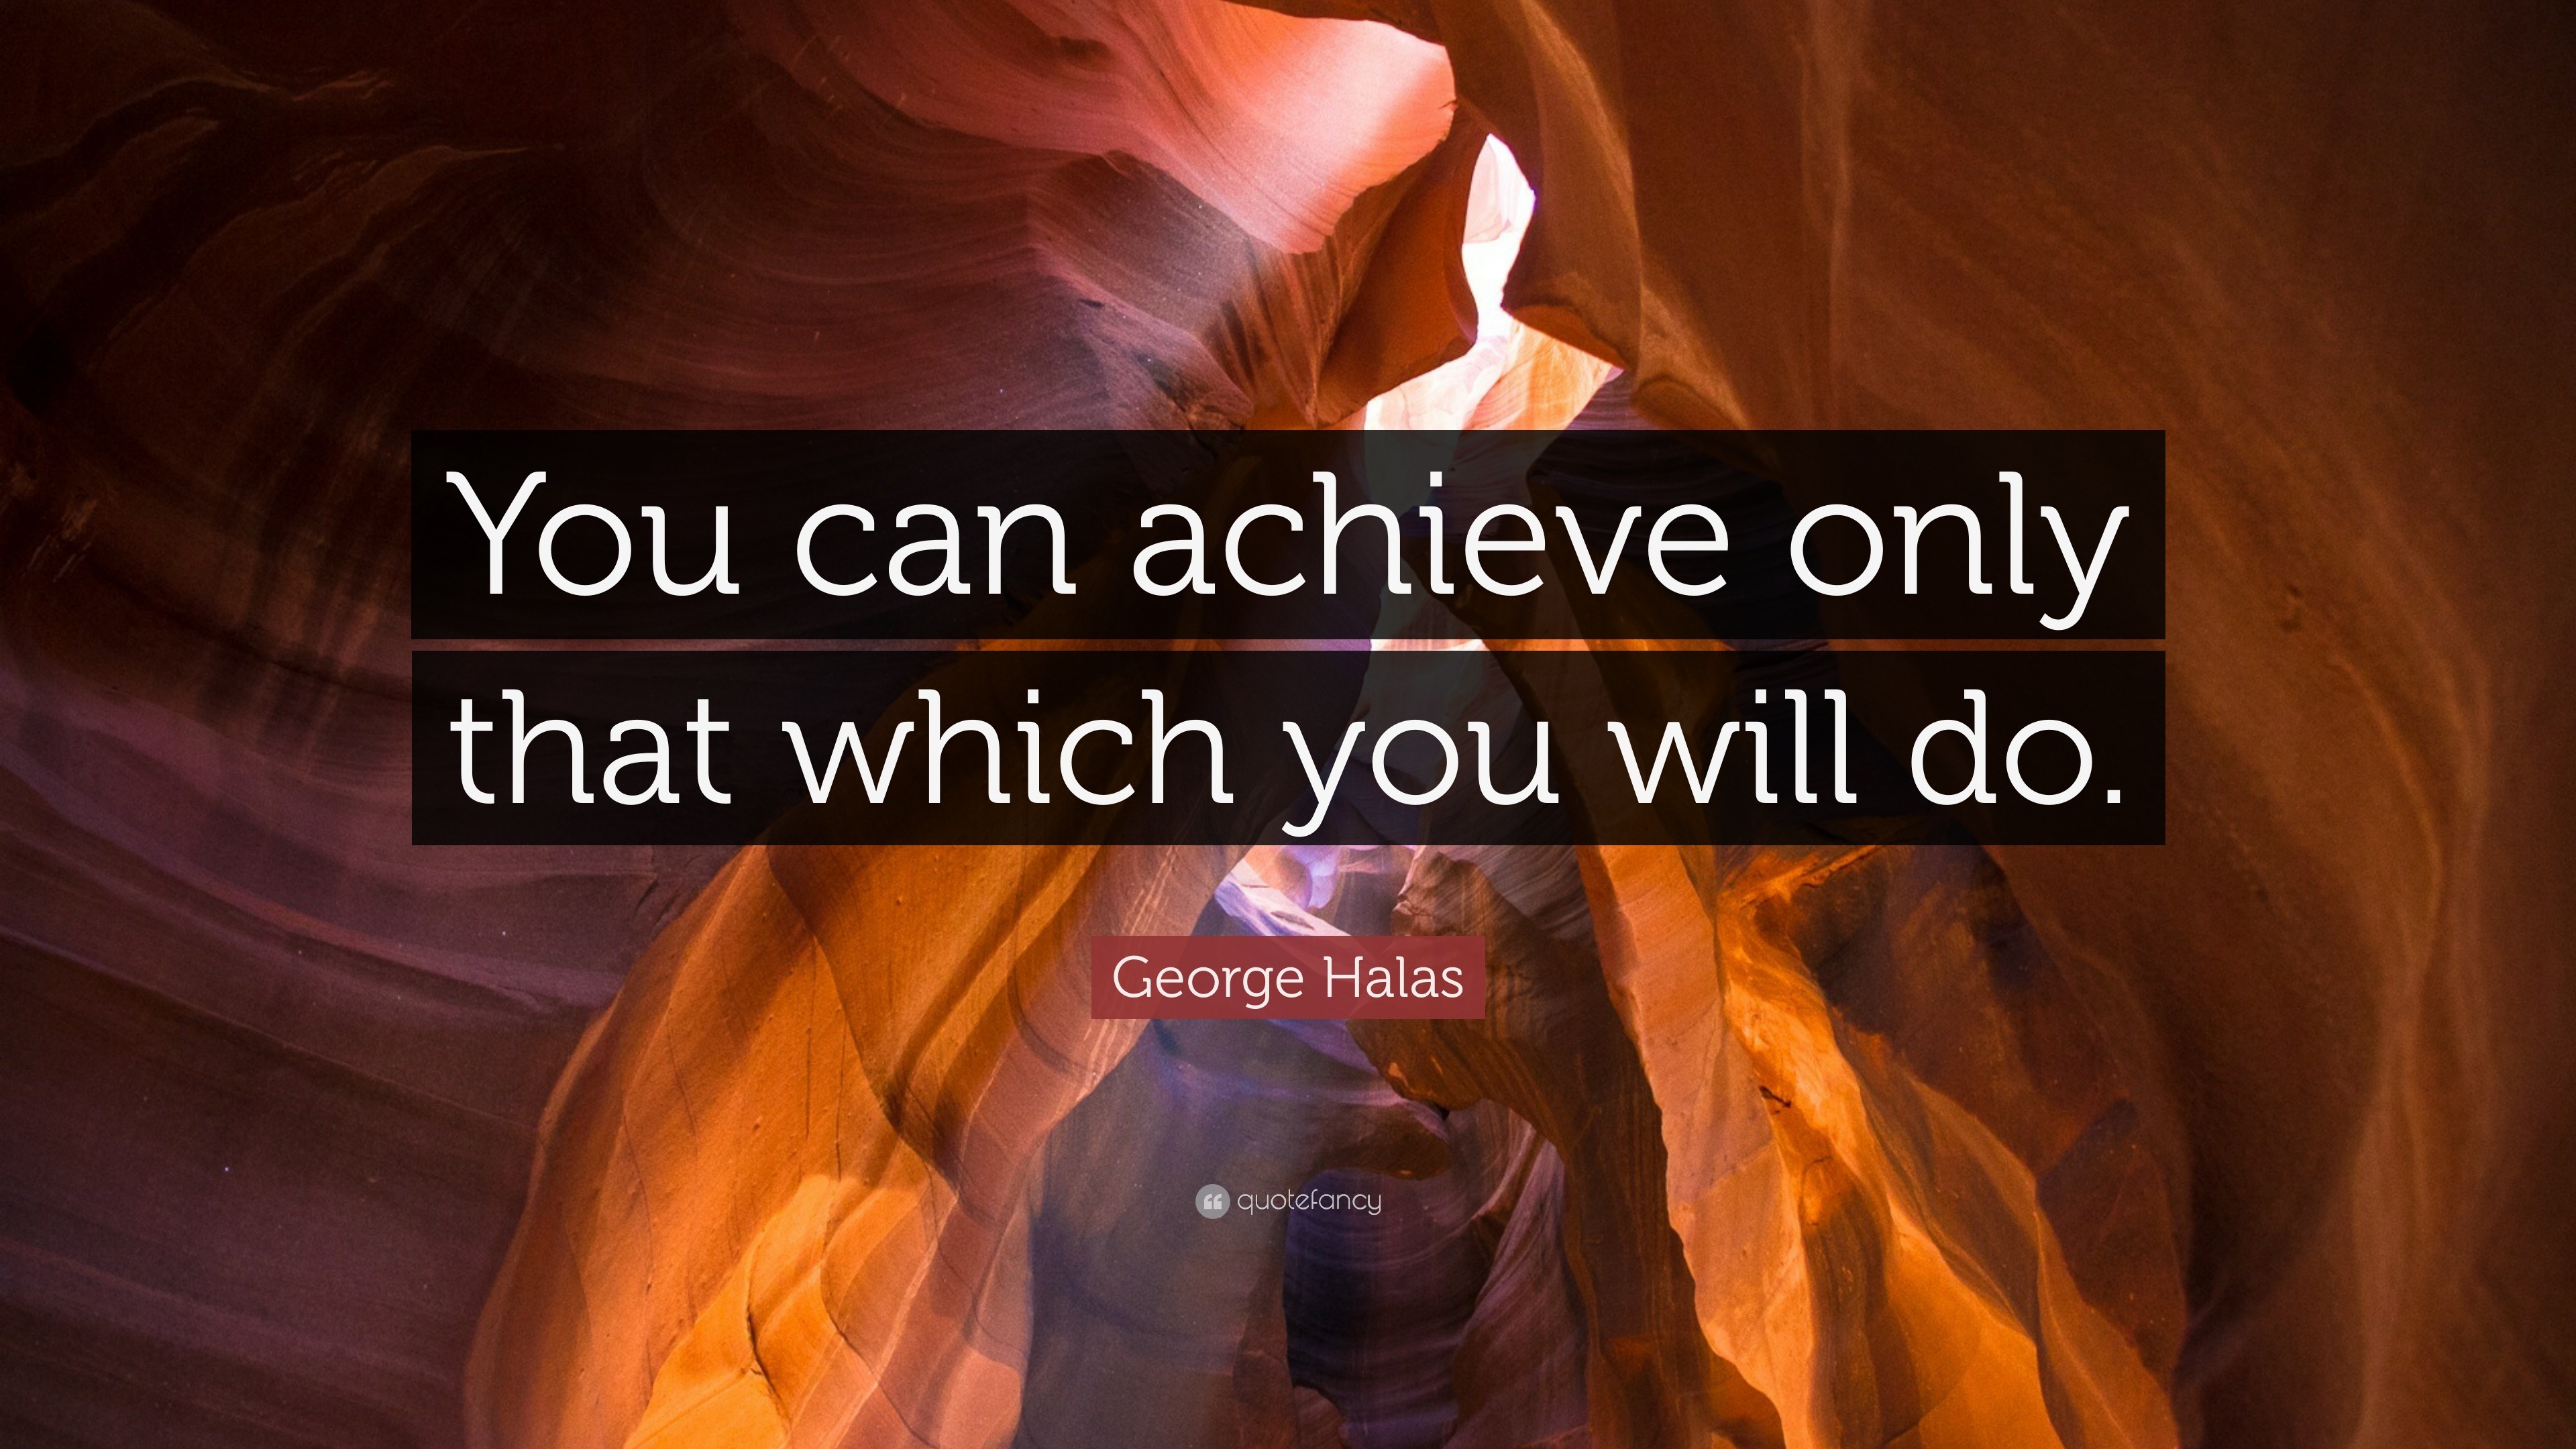 George Halas Quote: “You can achieve only that which you will do.”